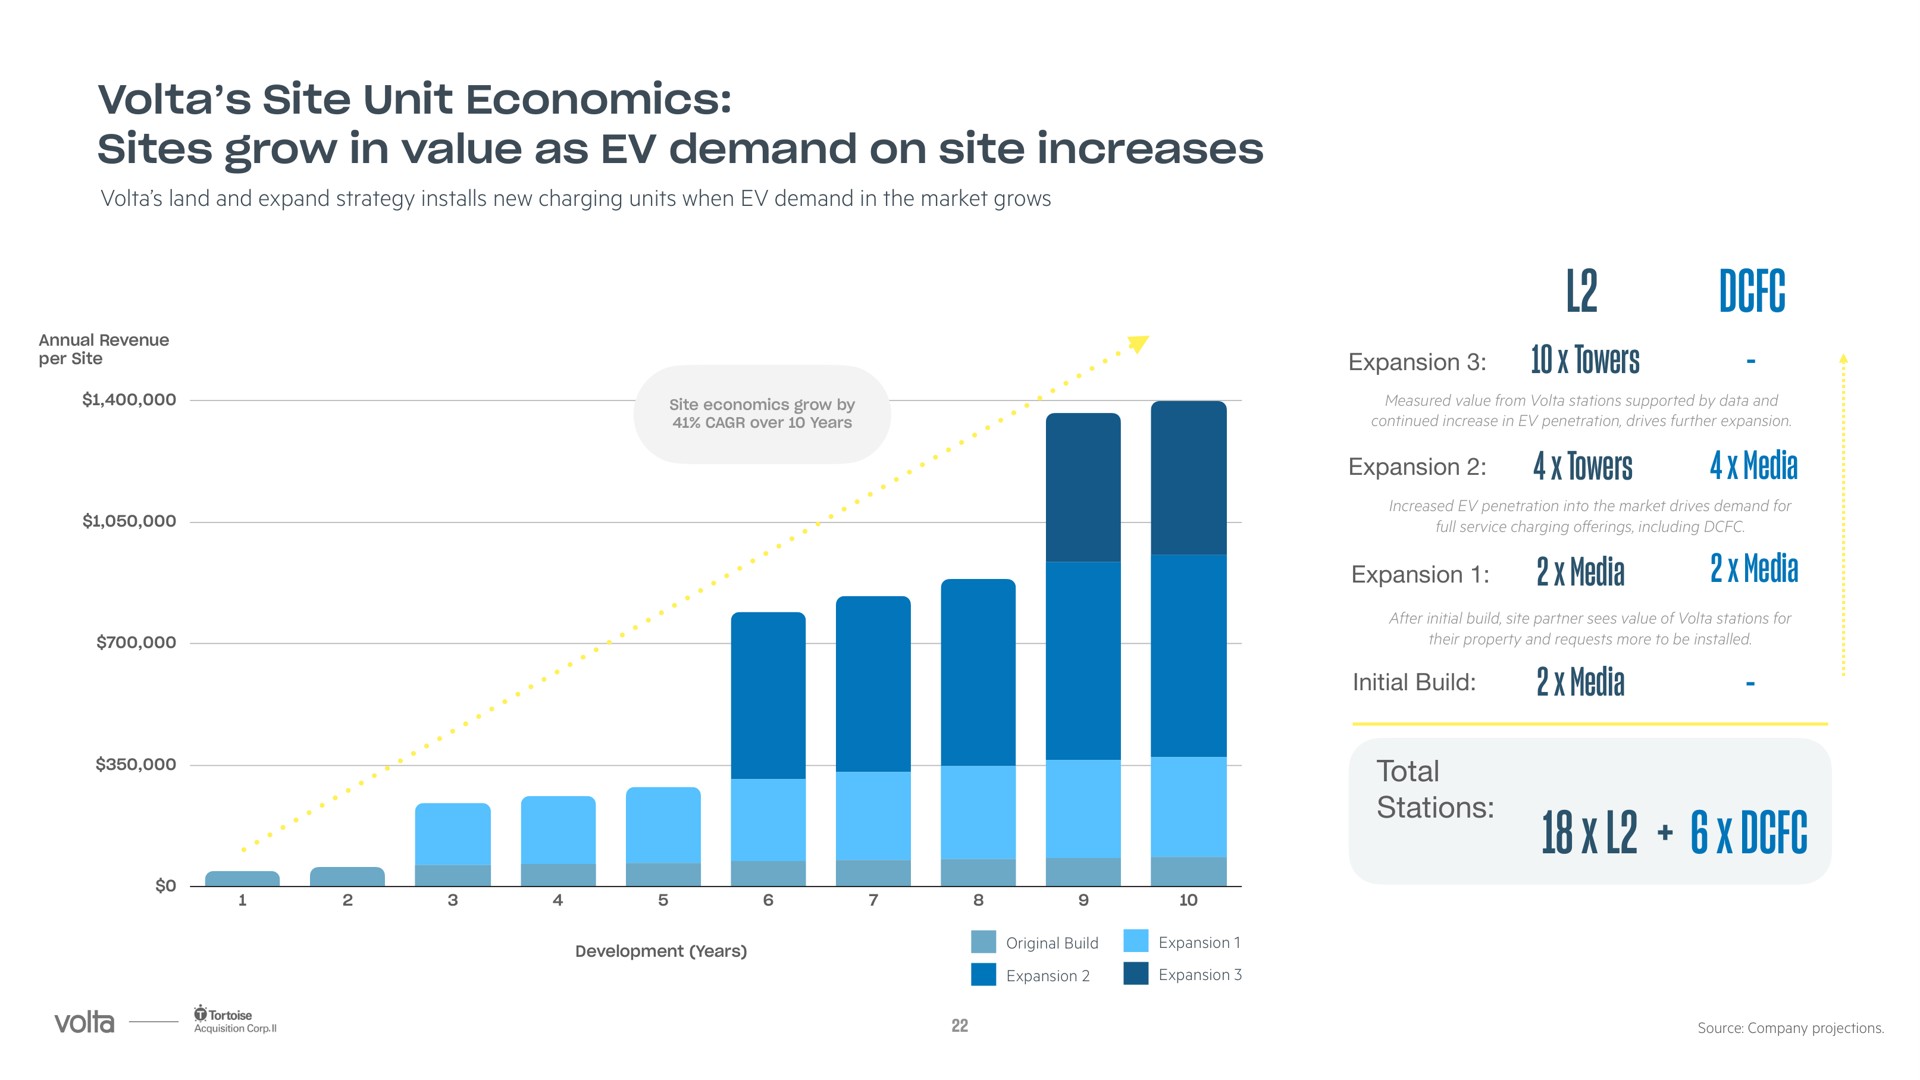 site unit economics sites grow in value as demand on site increases towers towers media media media media | Volta